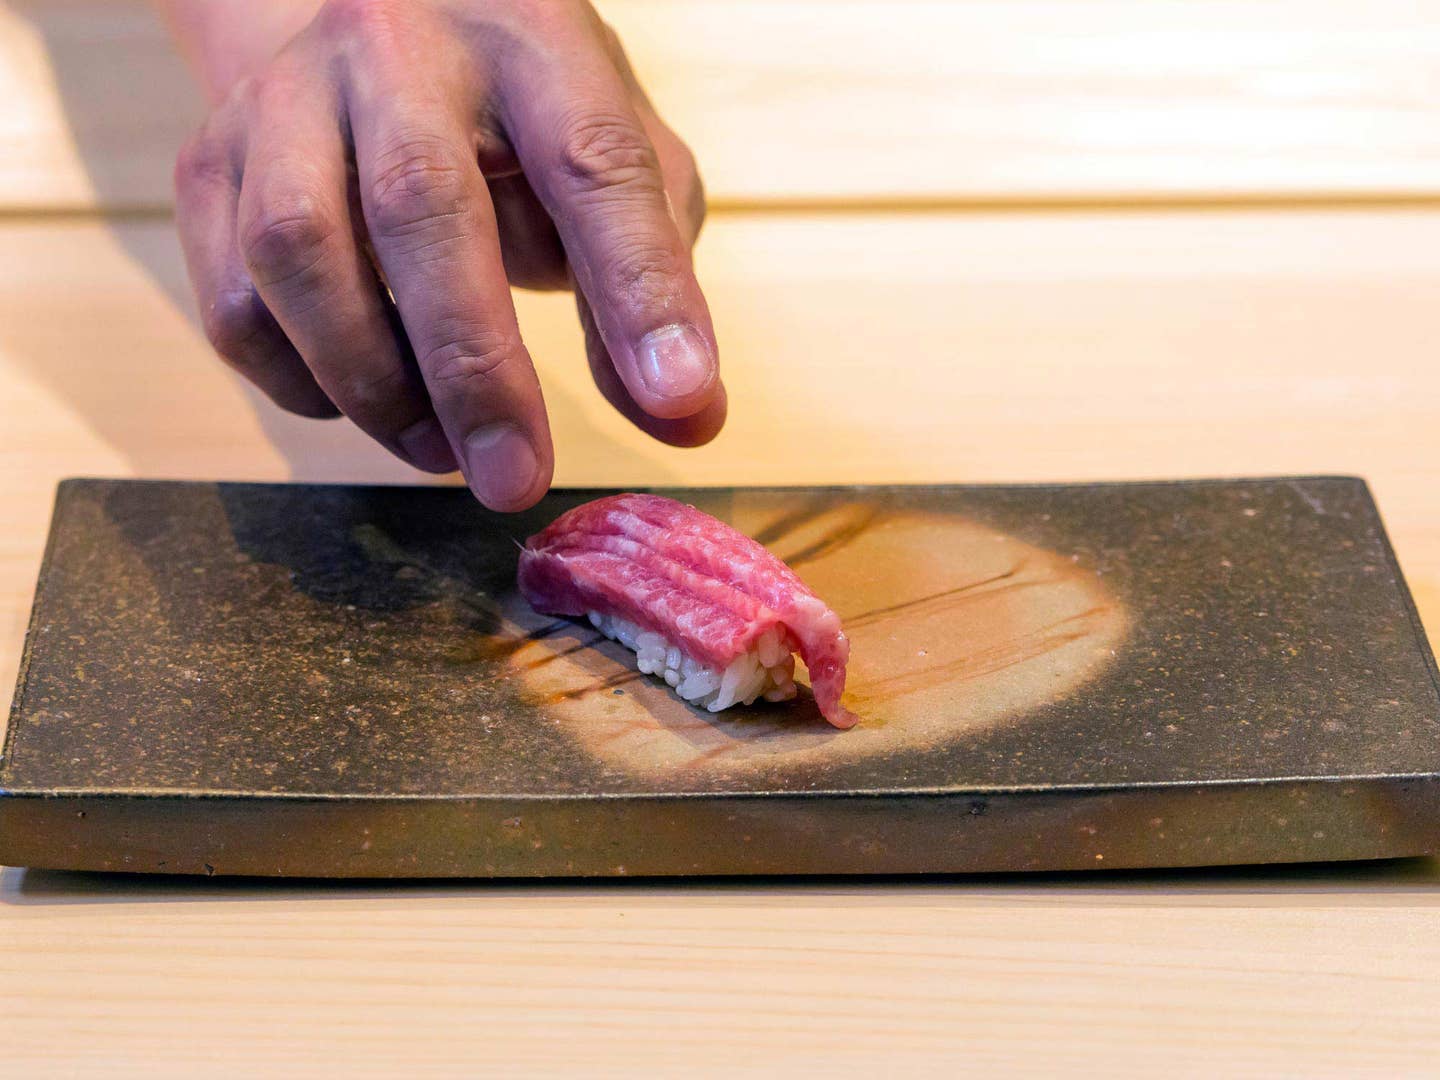 How the Centuries-Old Japanese Tradition of “Aged Sushi” is Evolving in America